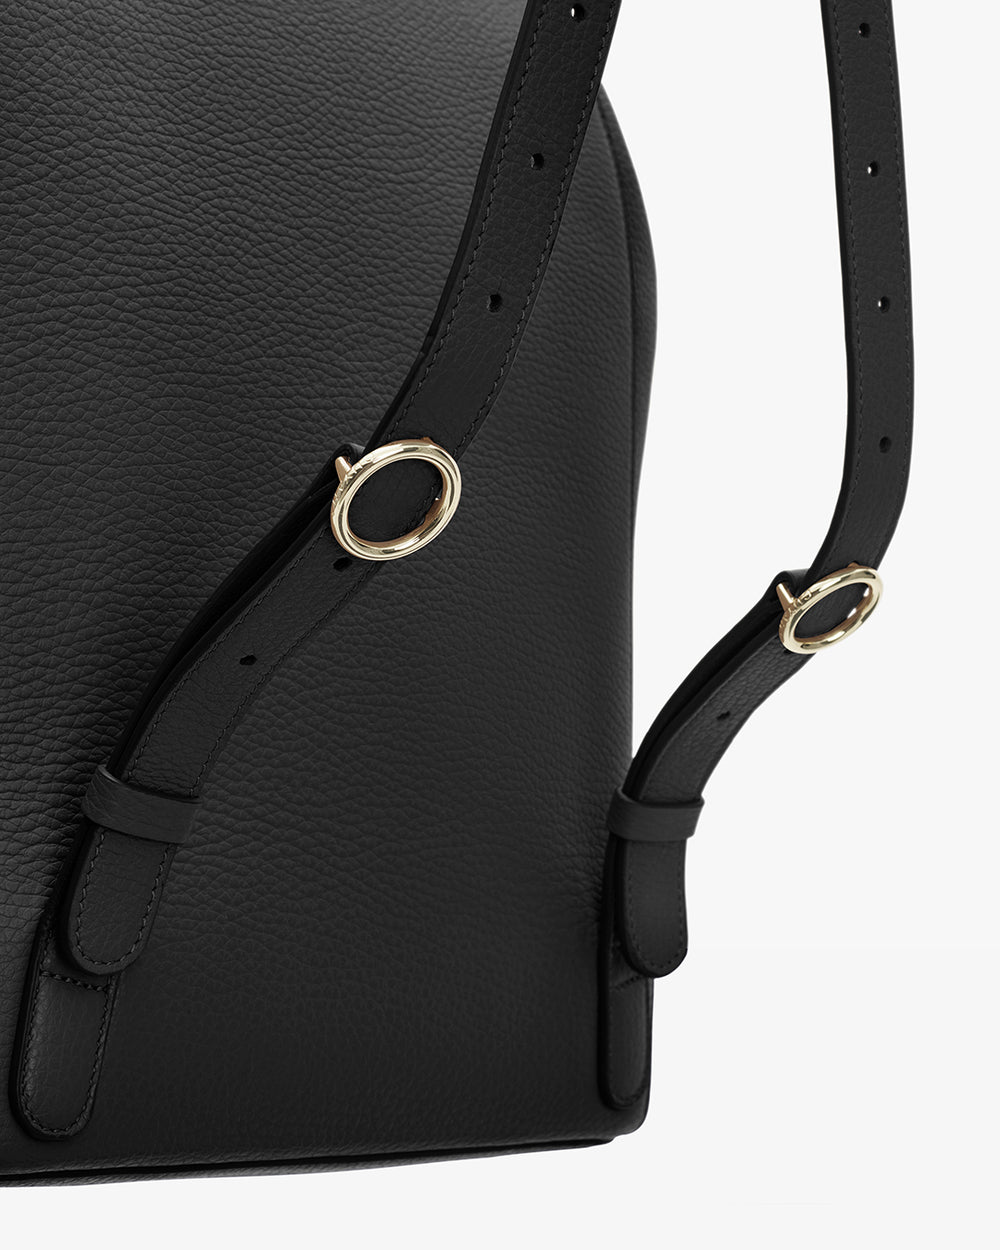 Close-up of a bag with a shoulder strap and metal rings.